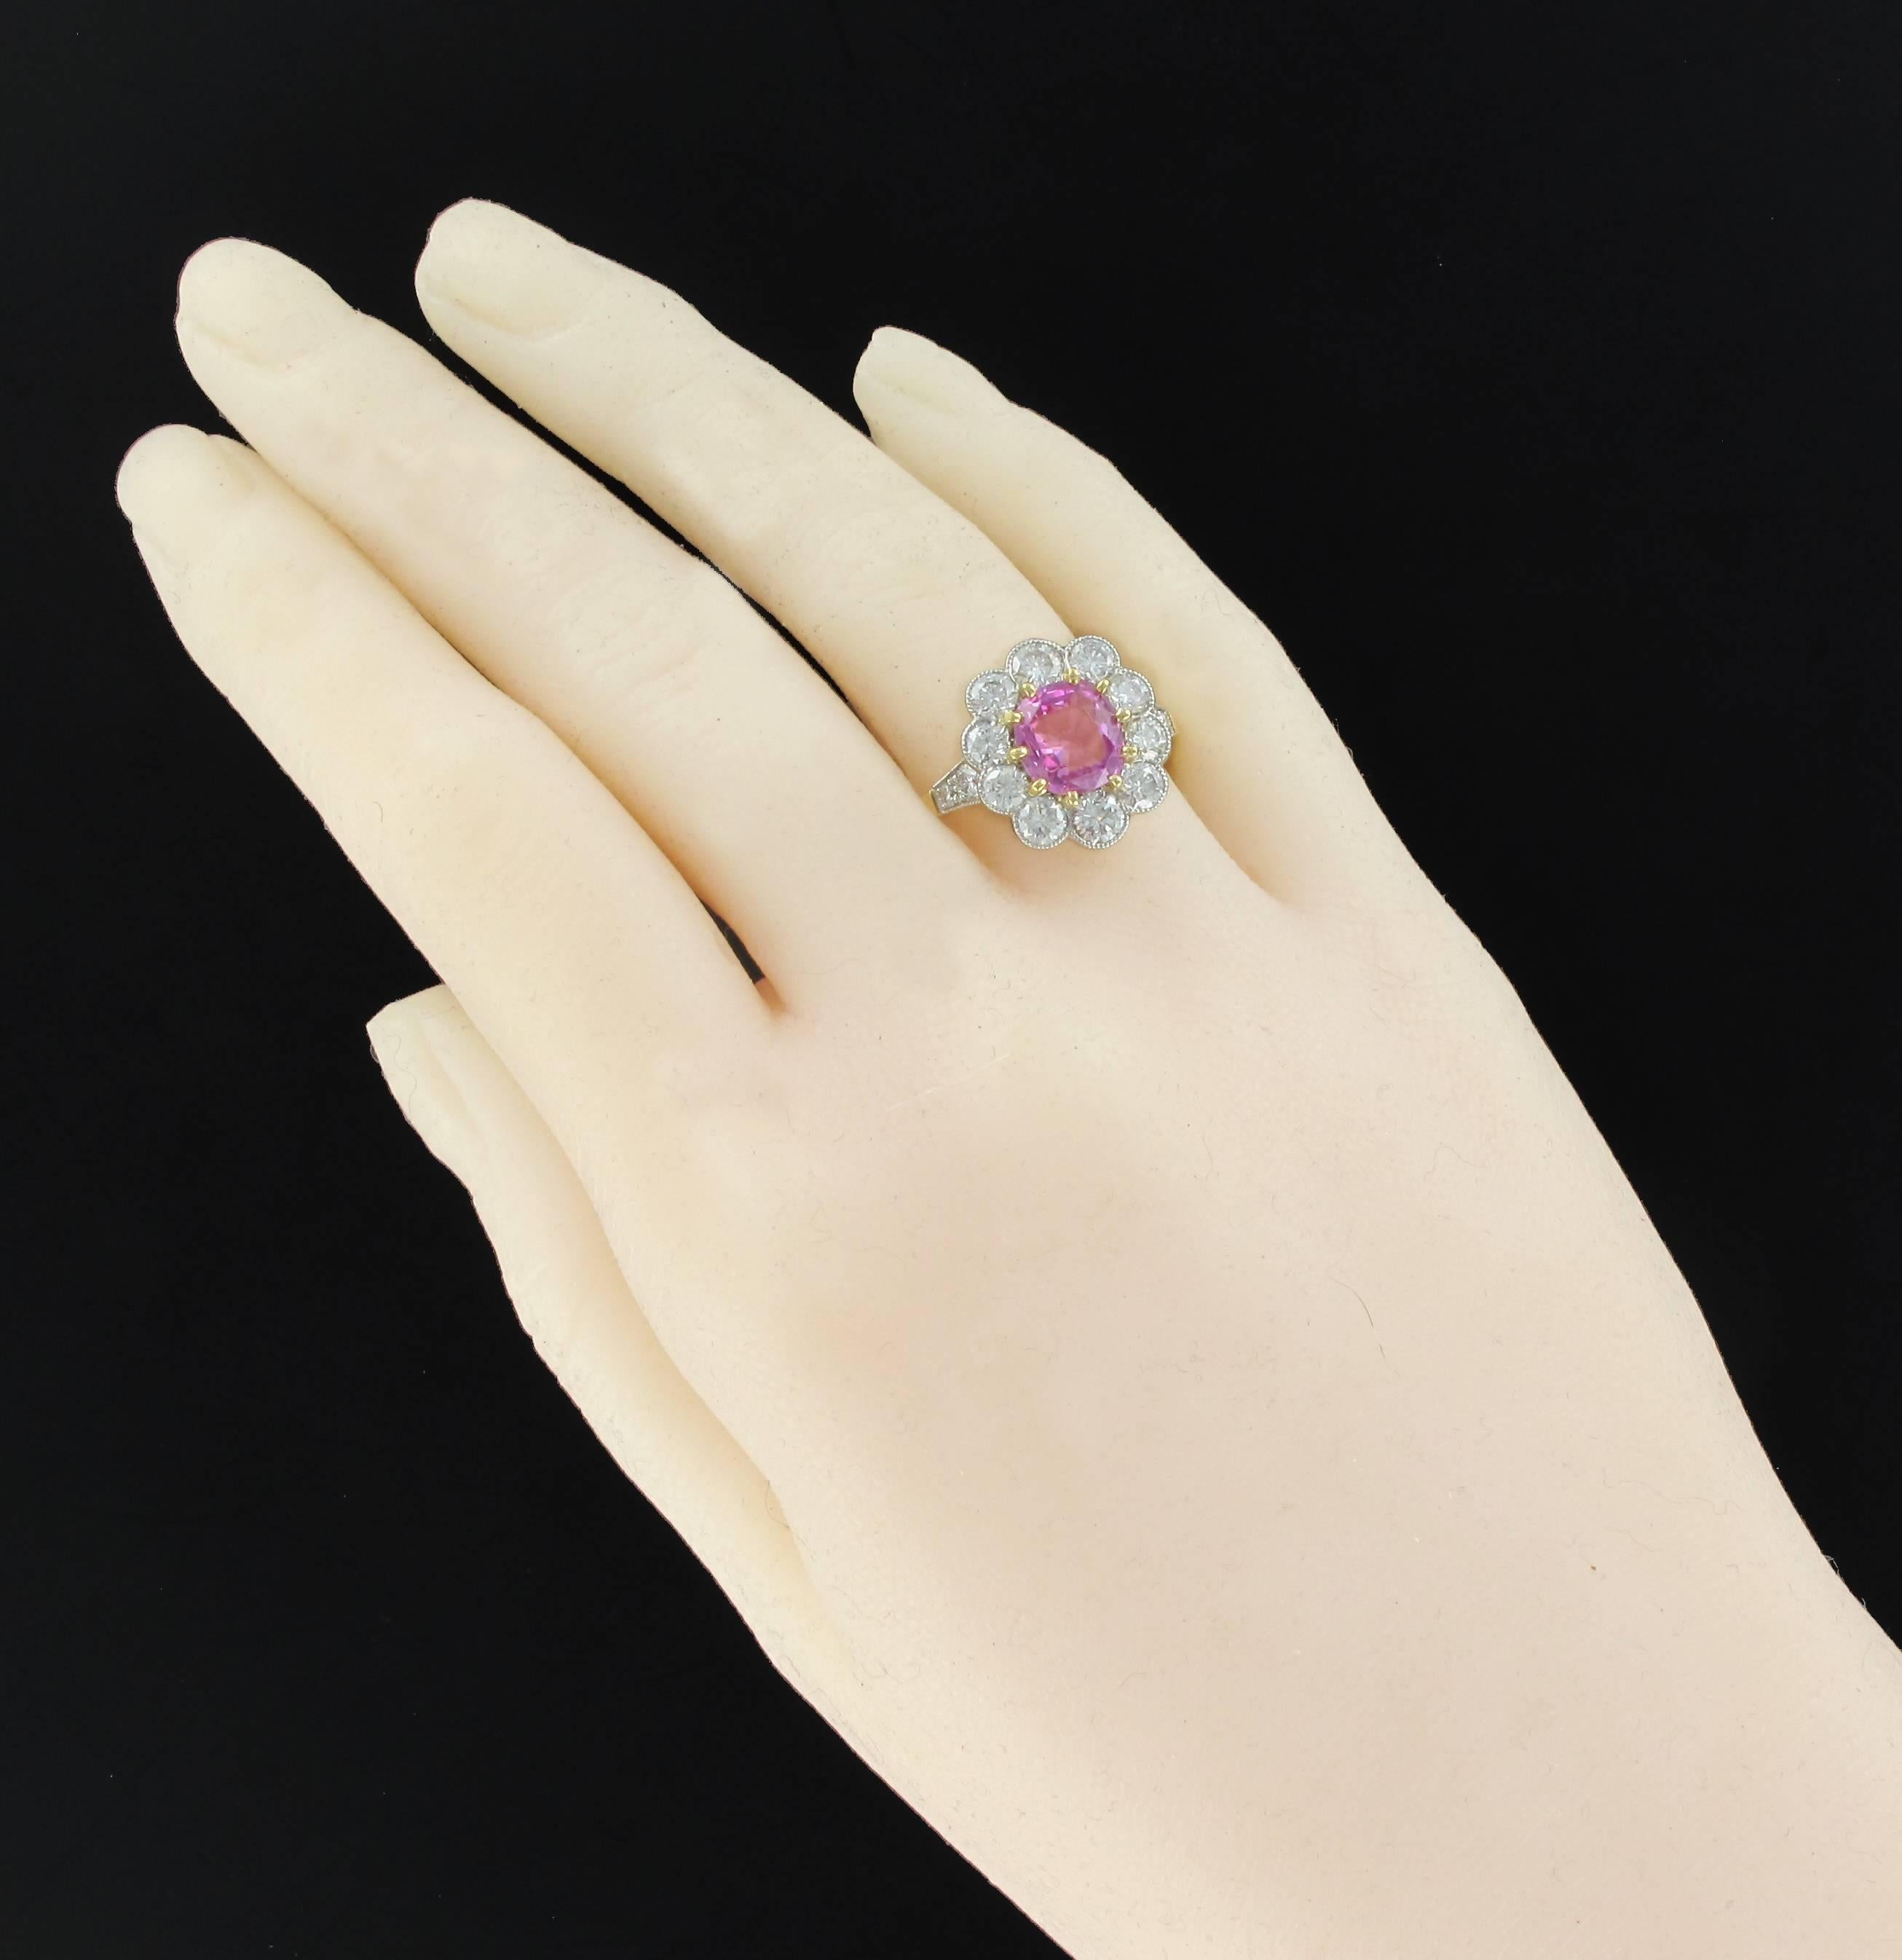 Ring in 18 carats yellow gold, eagle head hallmark and platinum, dog's head hallmark.
This beautiful daisy ring is set with claws of a cushion-cut pink sapphire surrounded by 10 brilliant-cut diamonds in millegrains set. On either side of the head